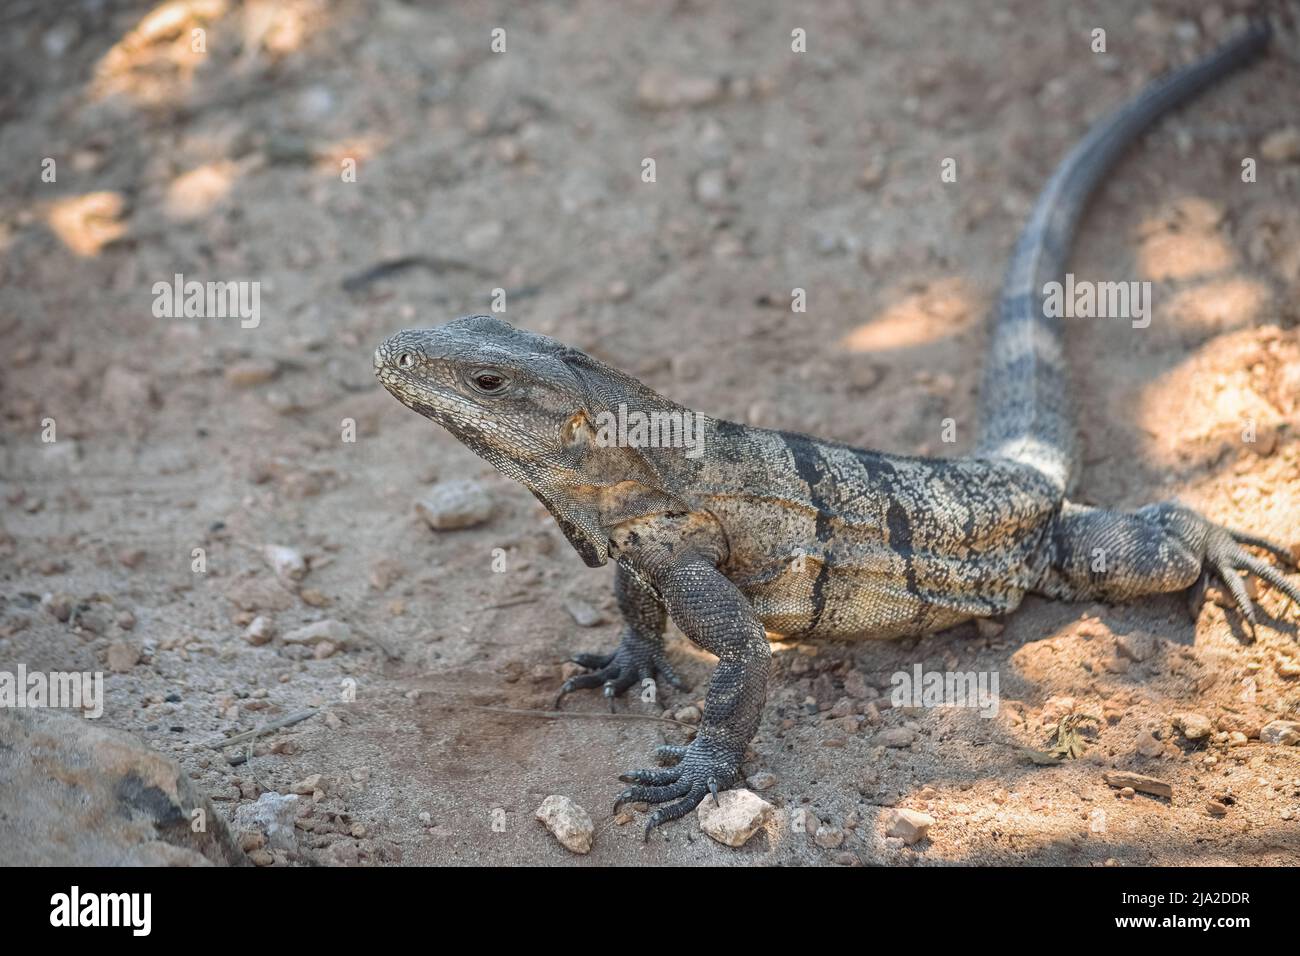 Brown Iguana with long tail, walking on dry land in Tulum, Mexico. Stock Photo